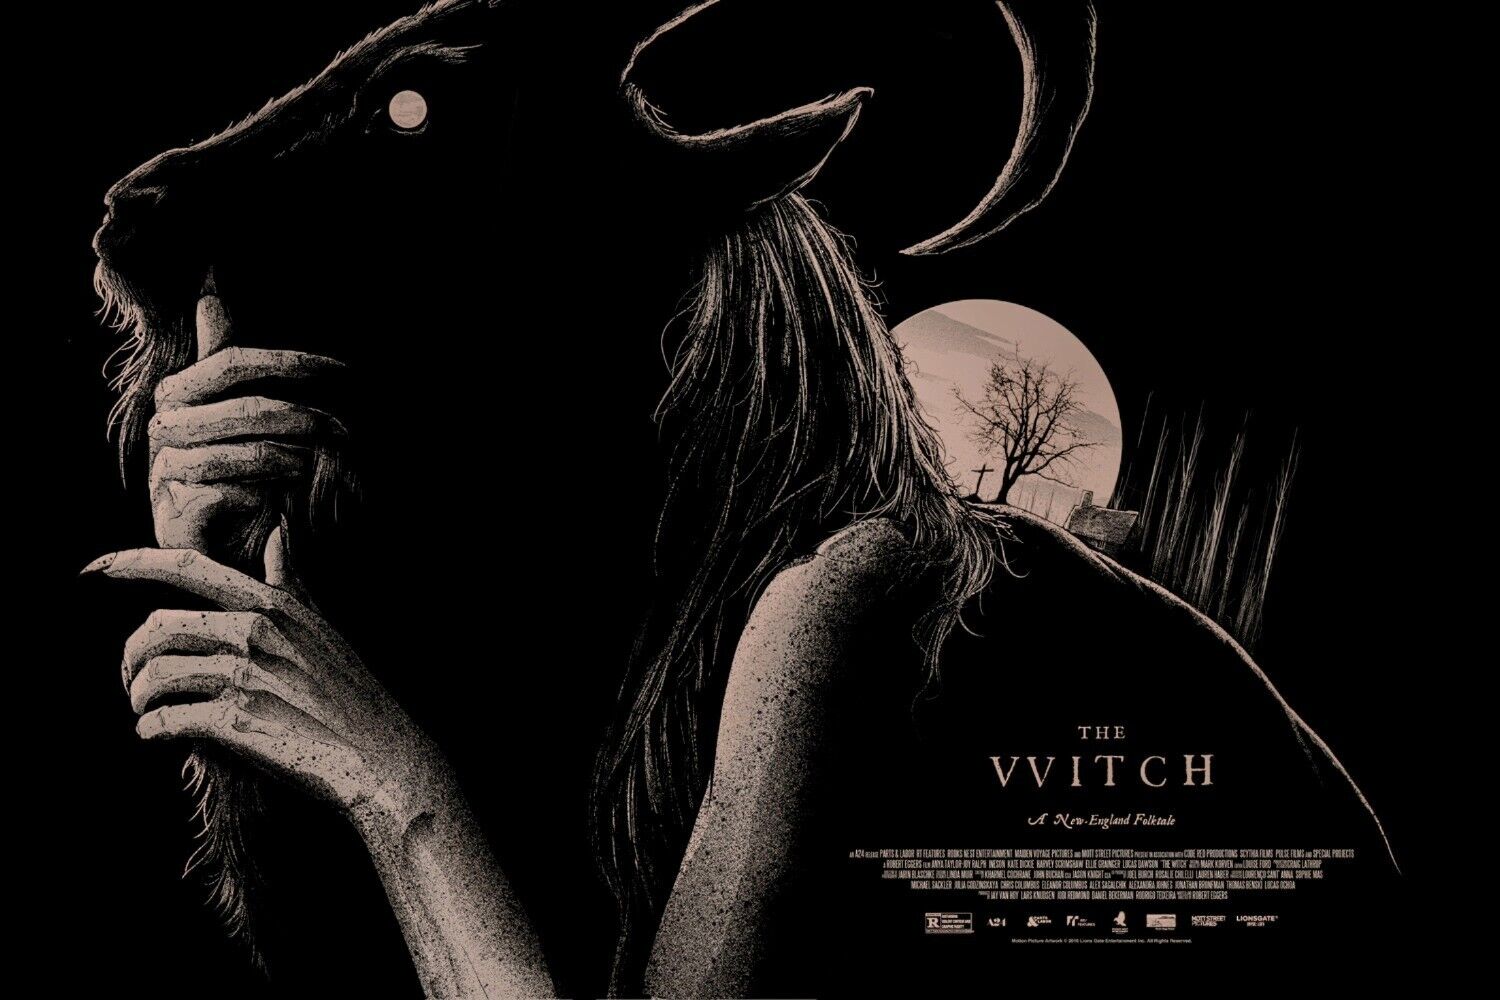 THE WITCH VVITCH